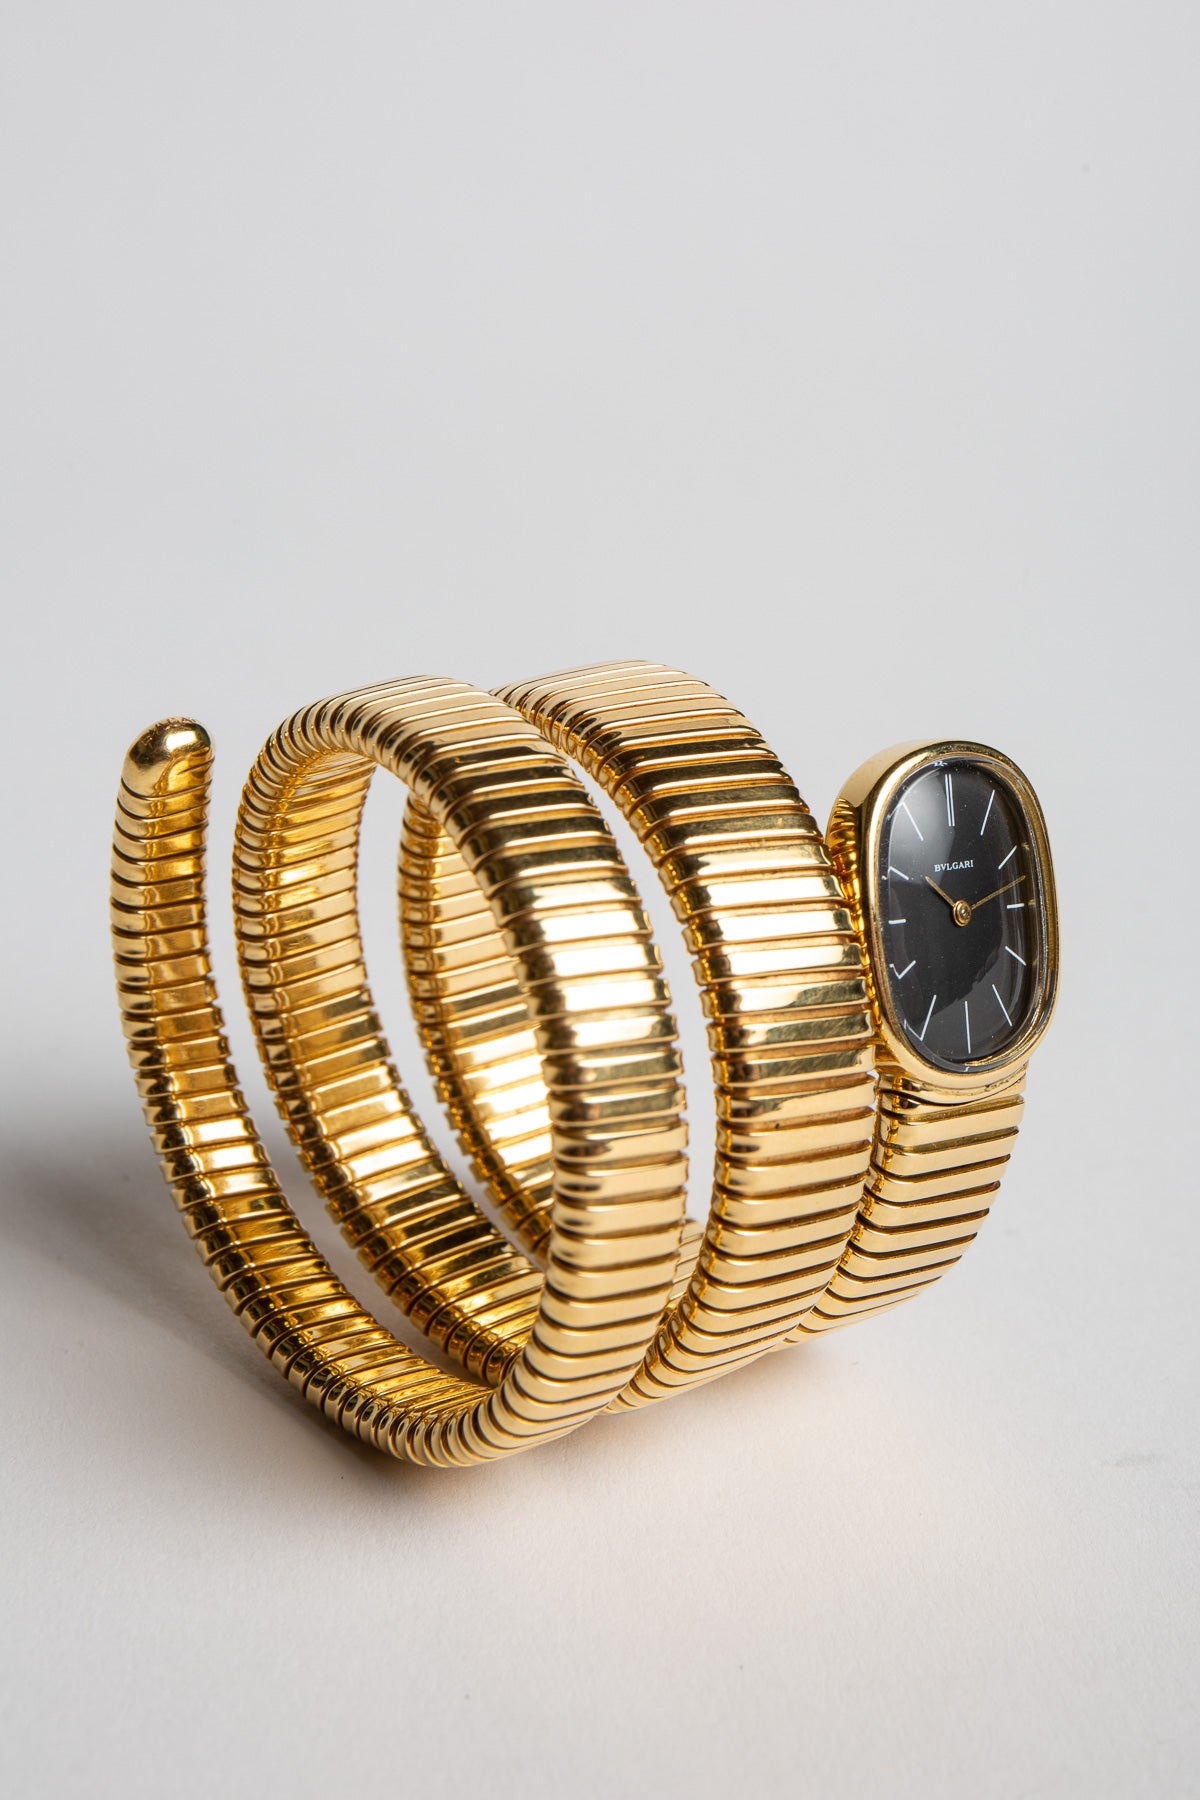 MAXFIELD PRIVATE COLLECTION | 1970 BULGARI SNAKE WATCH